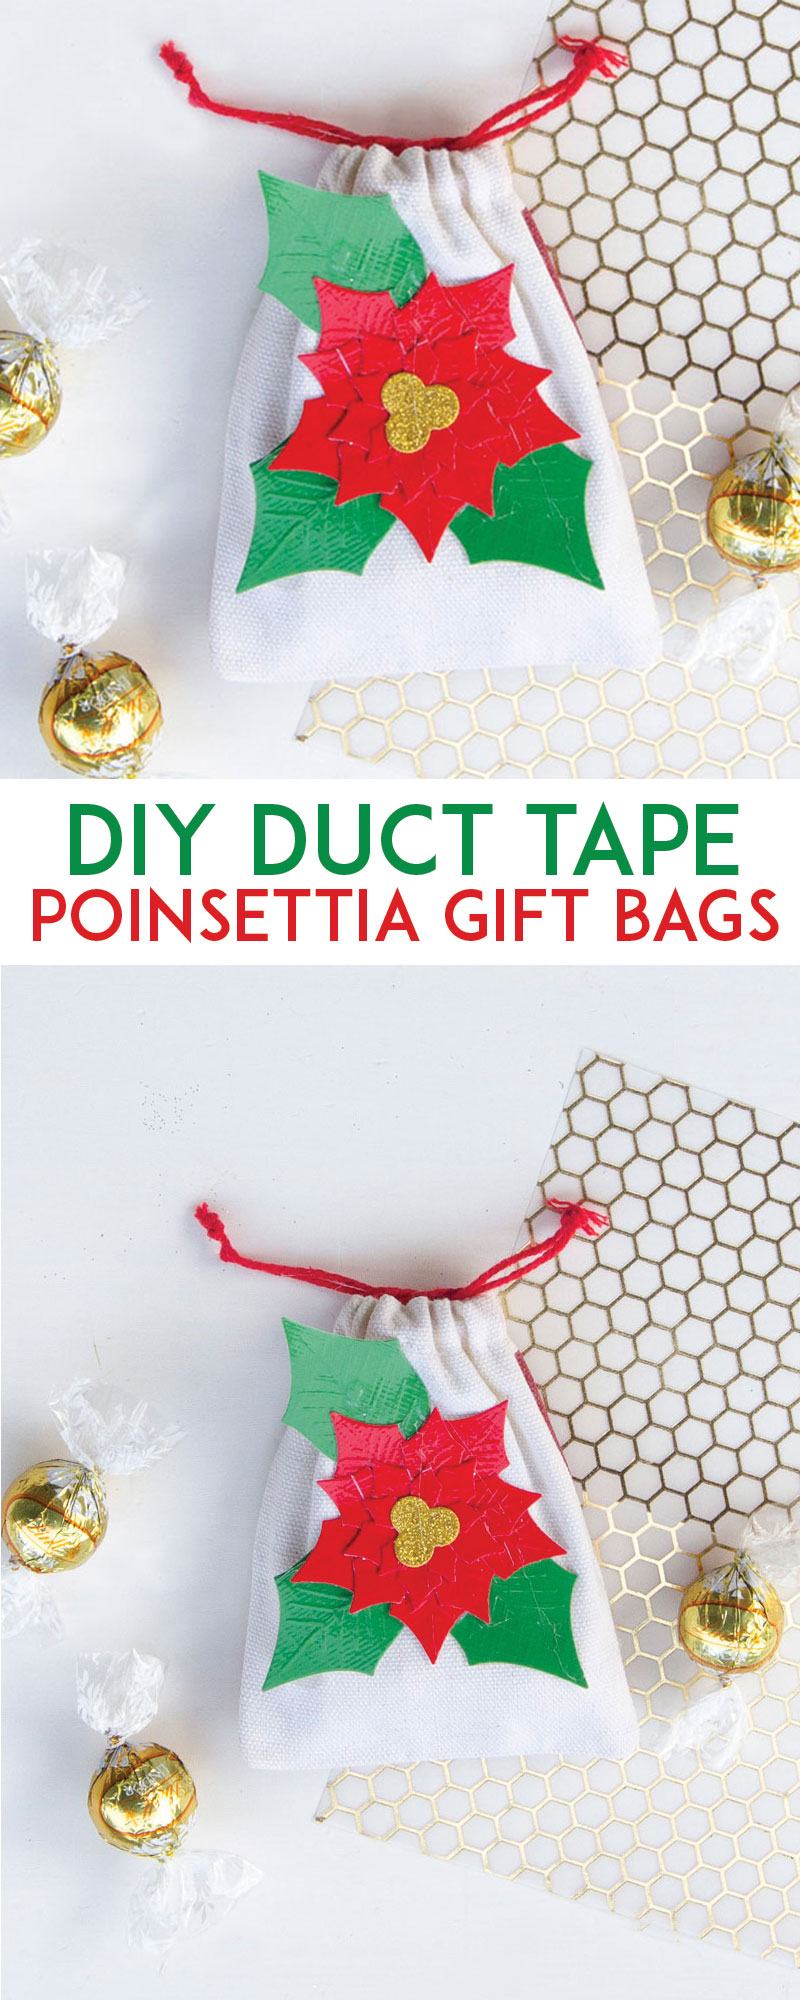 DIY Duct Tape Poinsettia Gift Bags by Lindi Haws of Love The Day